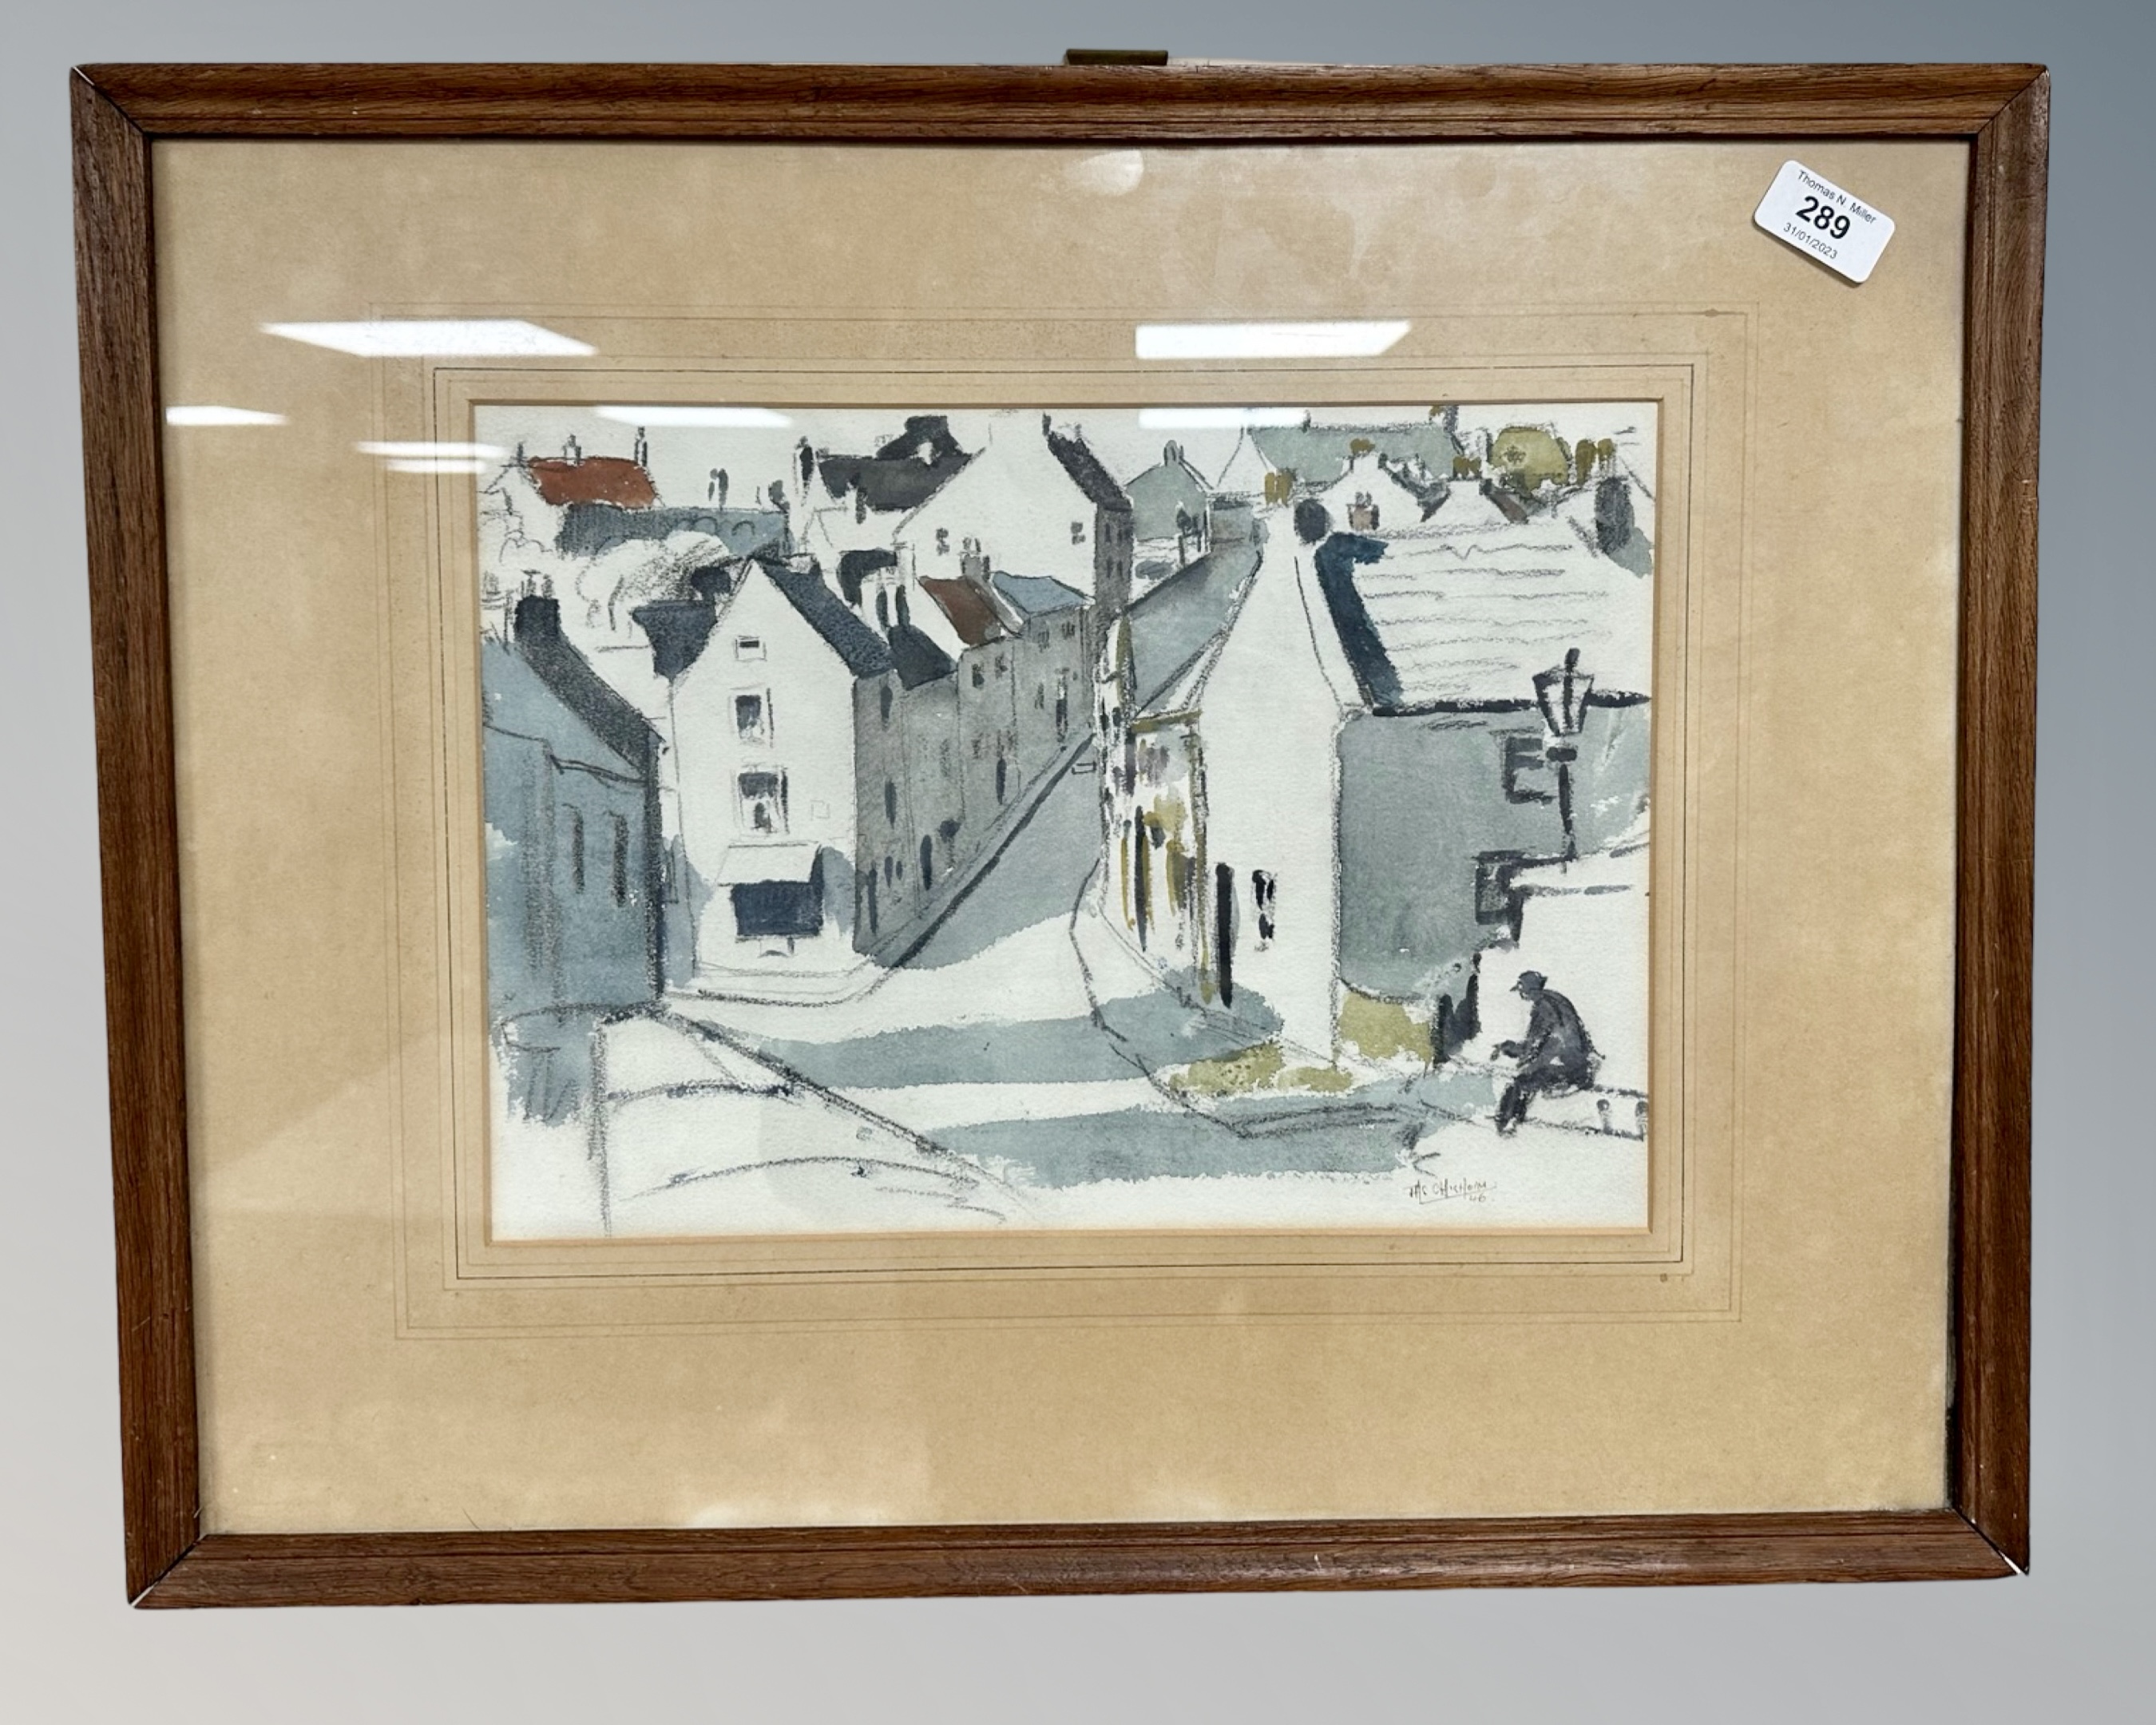 J. H. Chisholm : Figure in a street, watercolour drawing, signed and dated -46, 35cm by 25cm.